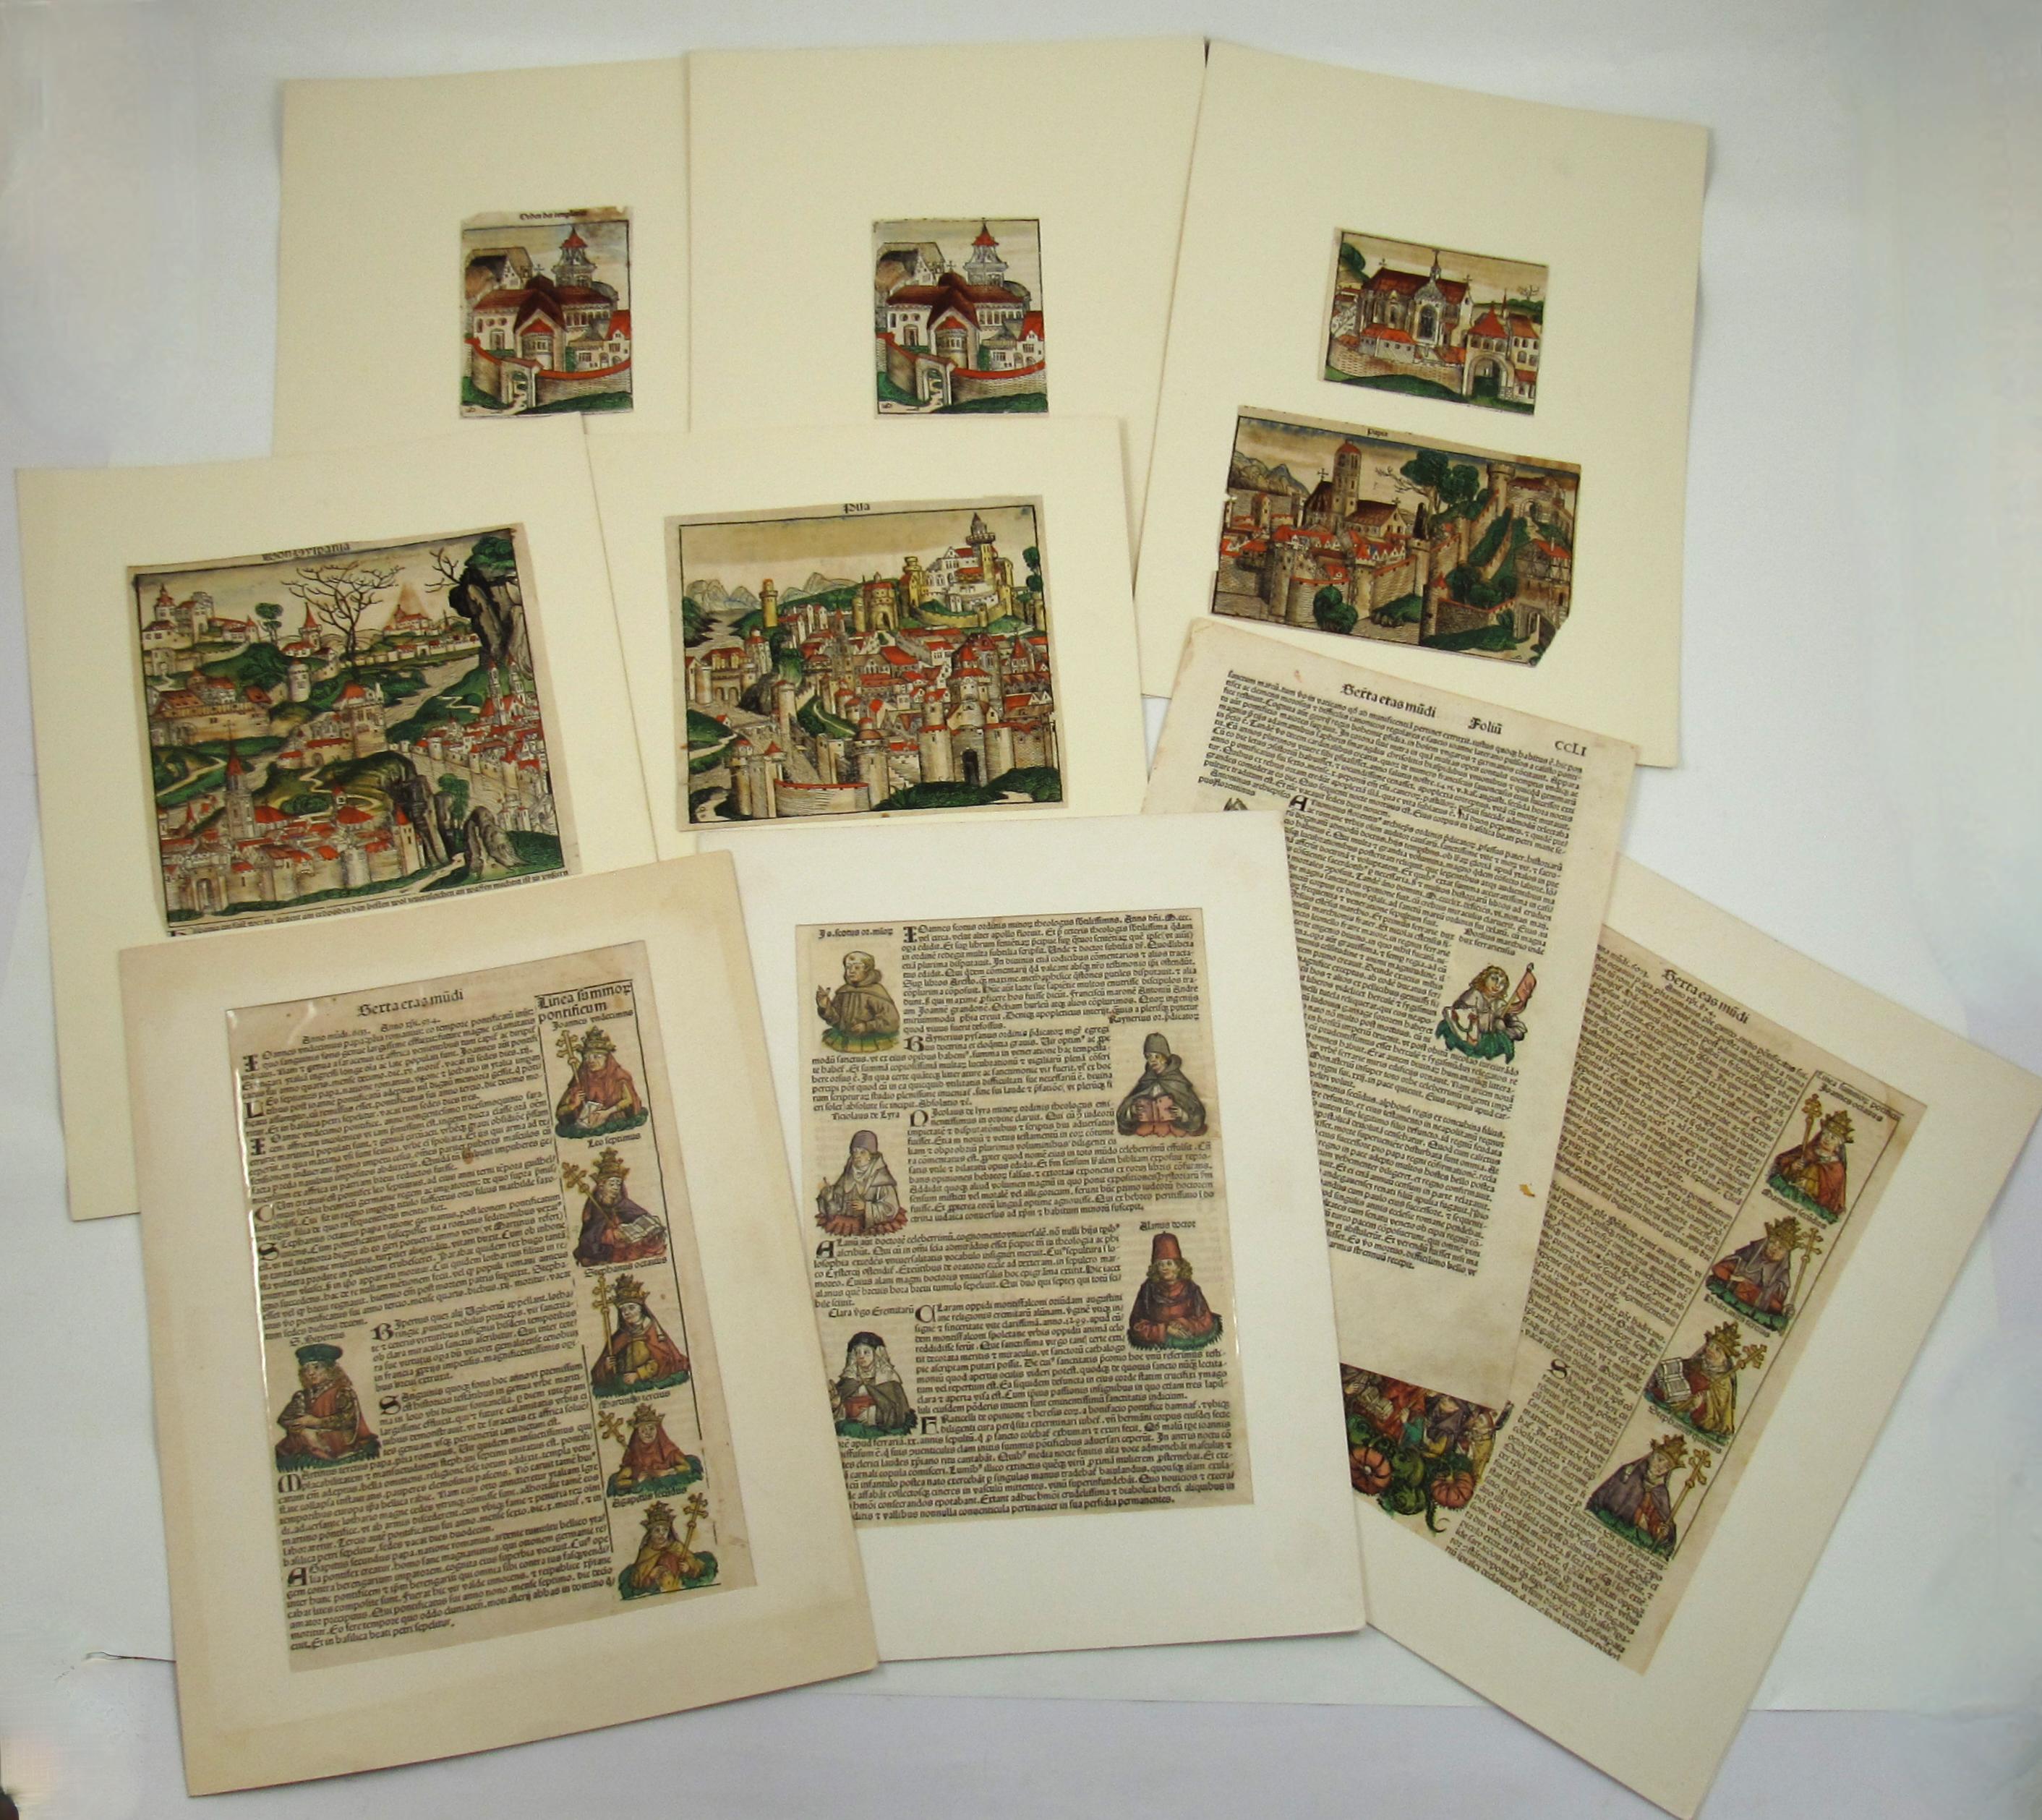 Hartmann Schedel Figurative Print - Collection of Ten Medieval Woodblock Prints from the 'Nuremberg Chronicle' 